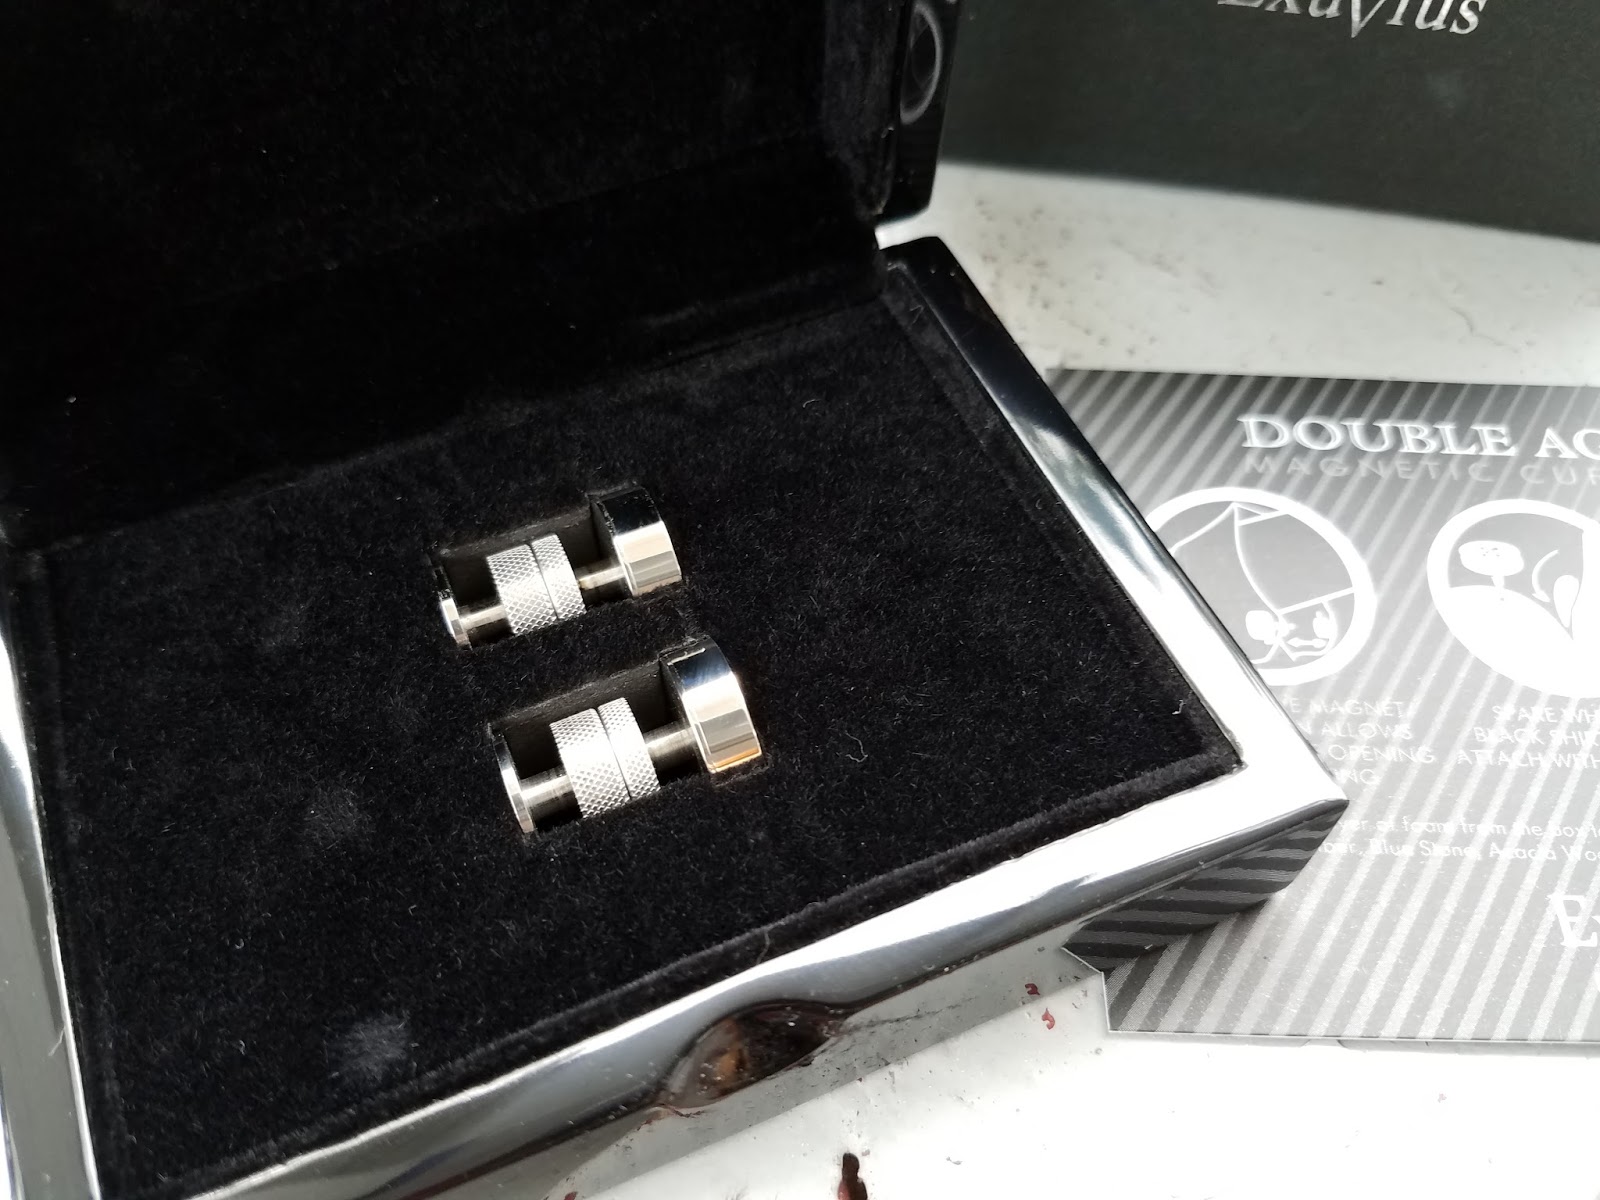 Exuvius Double Agent Magnetic Cufflink Collection with Transforming Accessory Box